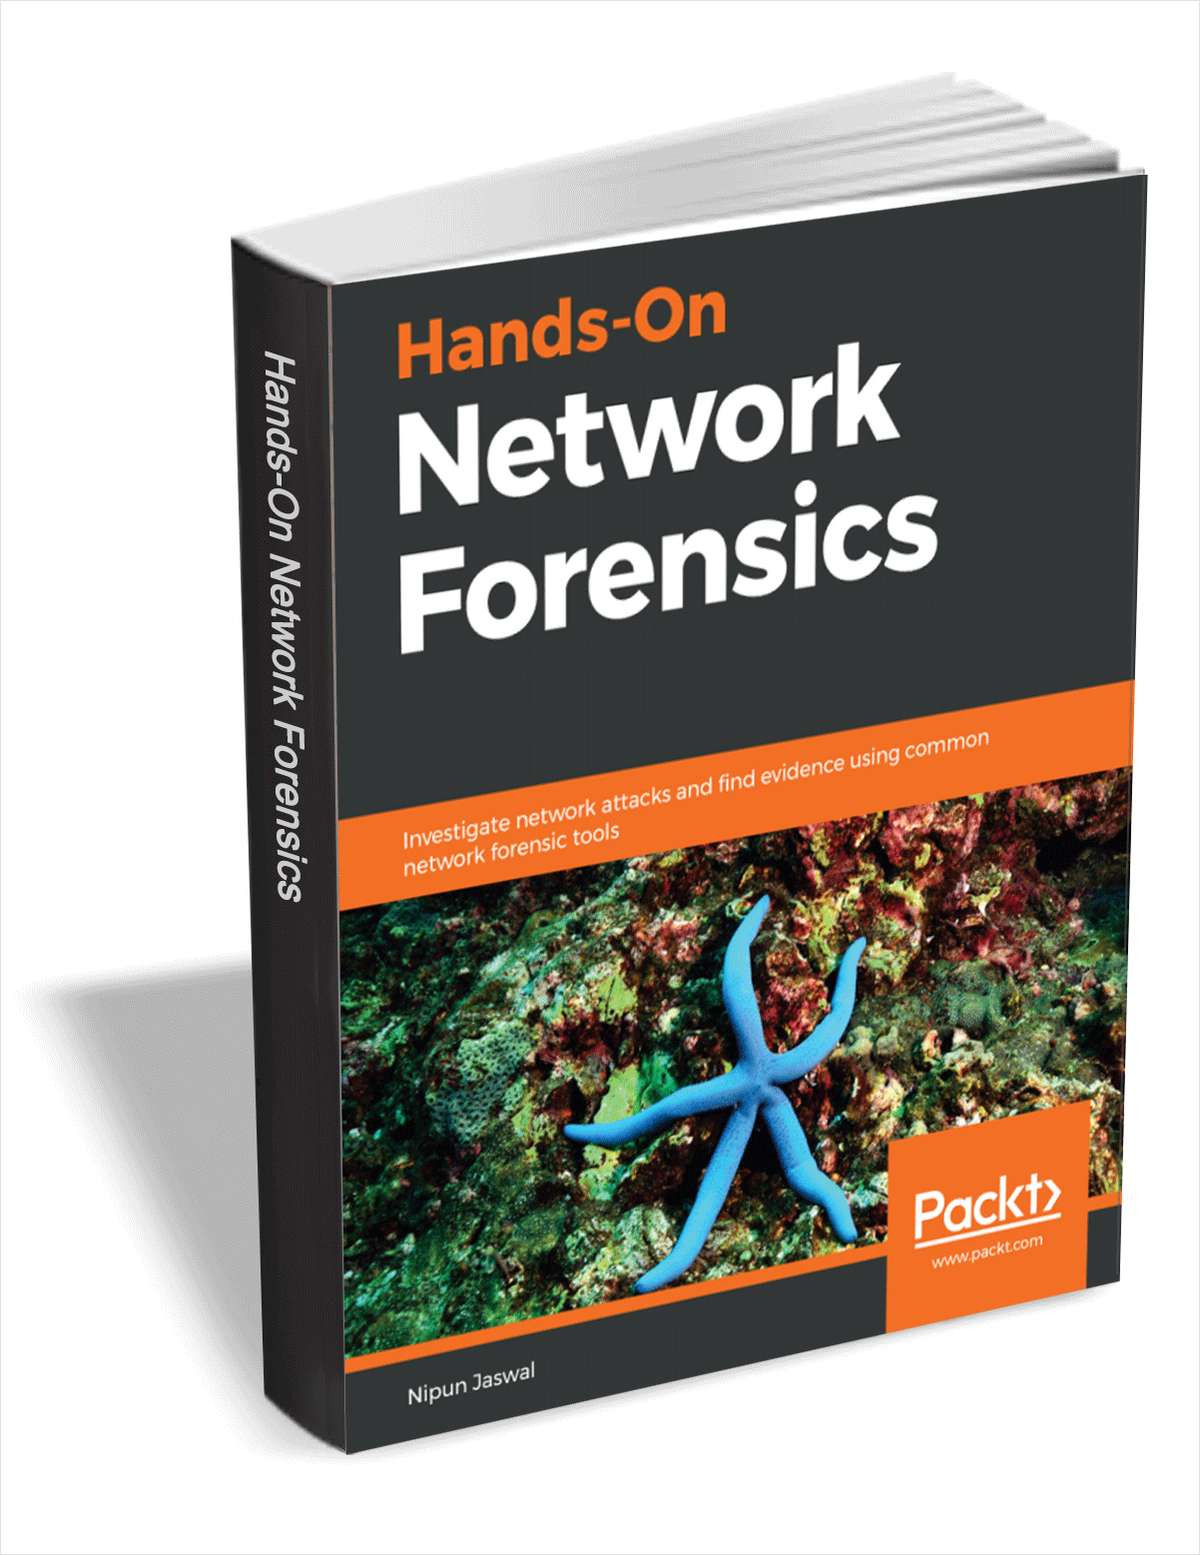 Hands-On Network Forensics ($20 Value) FREE For a Limited Time Screenshot